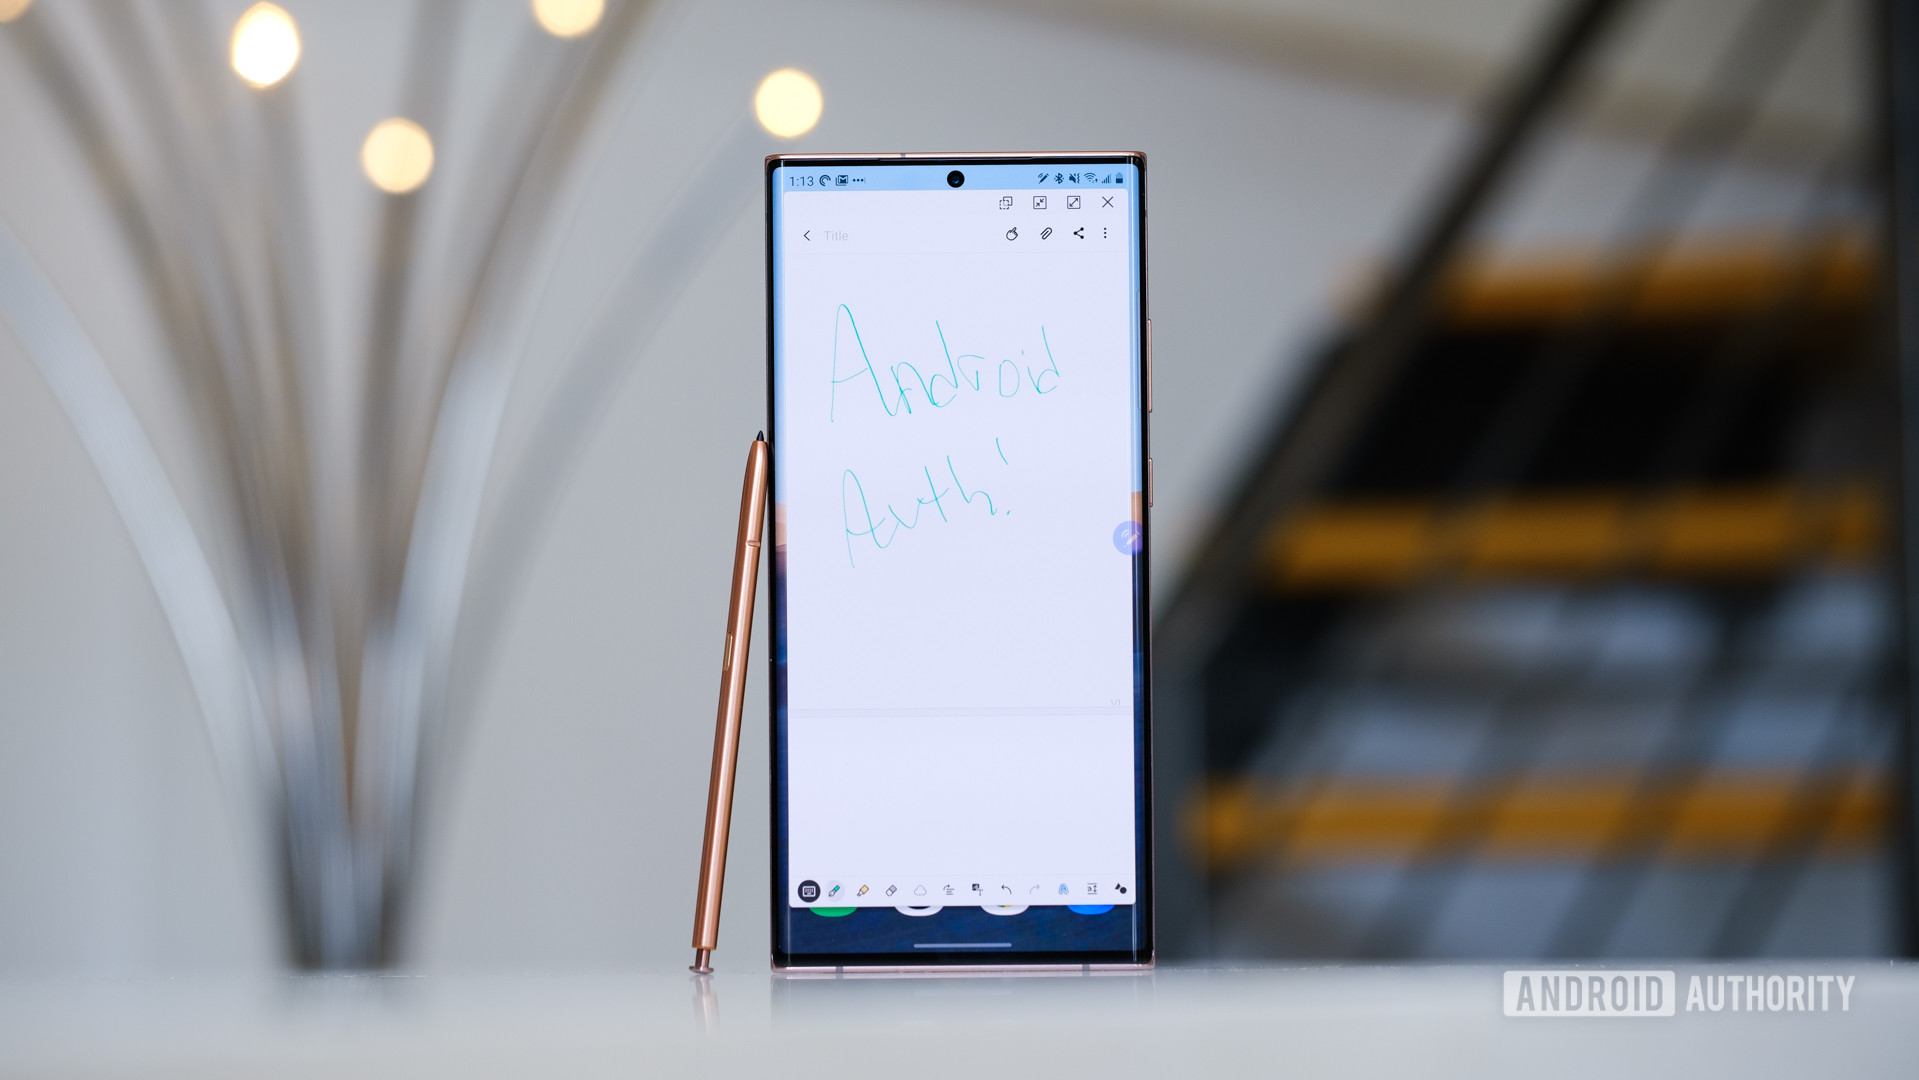 Samsung Galaxy Note 20 Ultra notes app open with pen